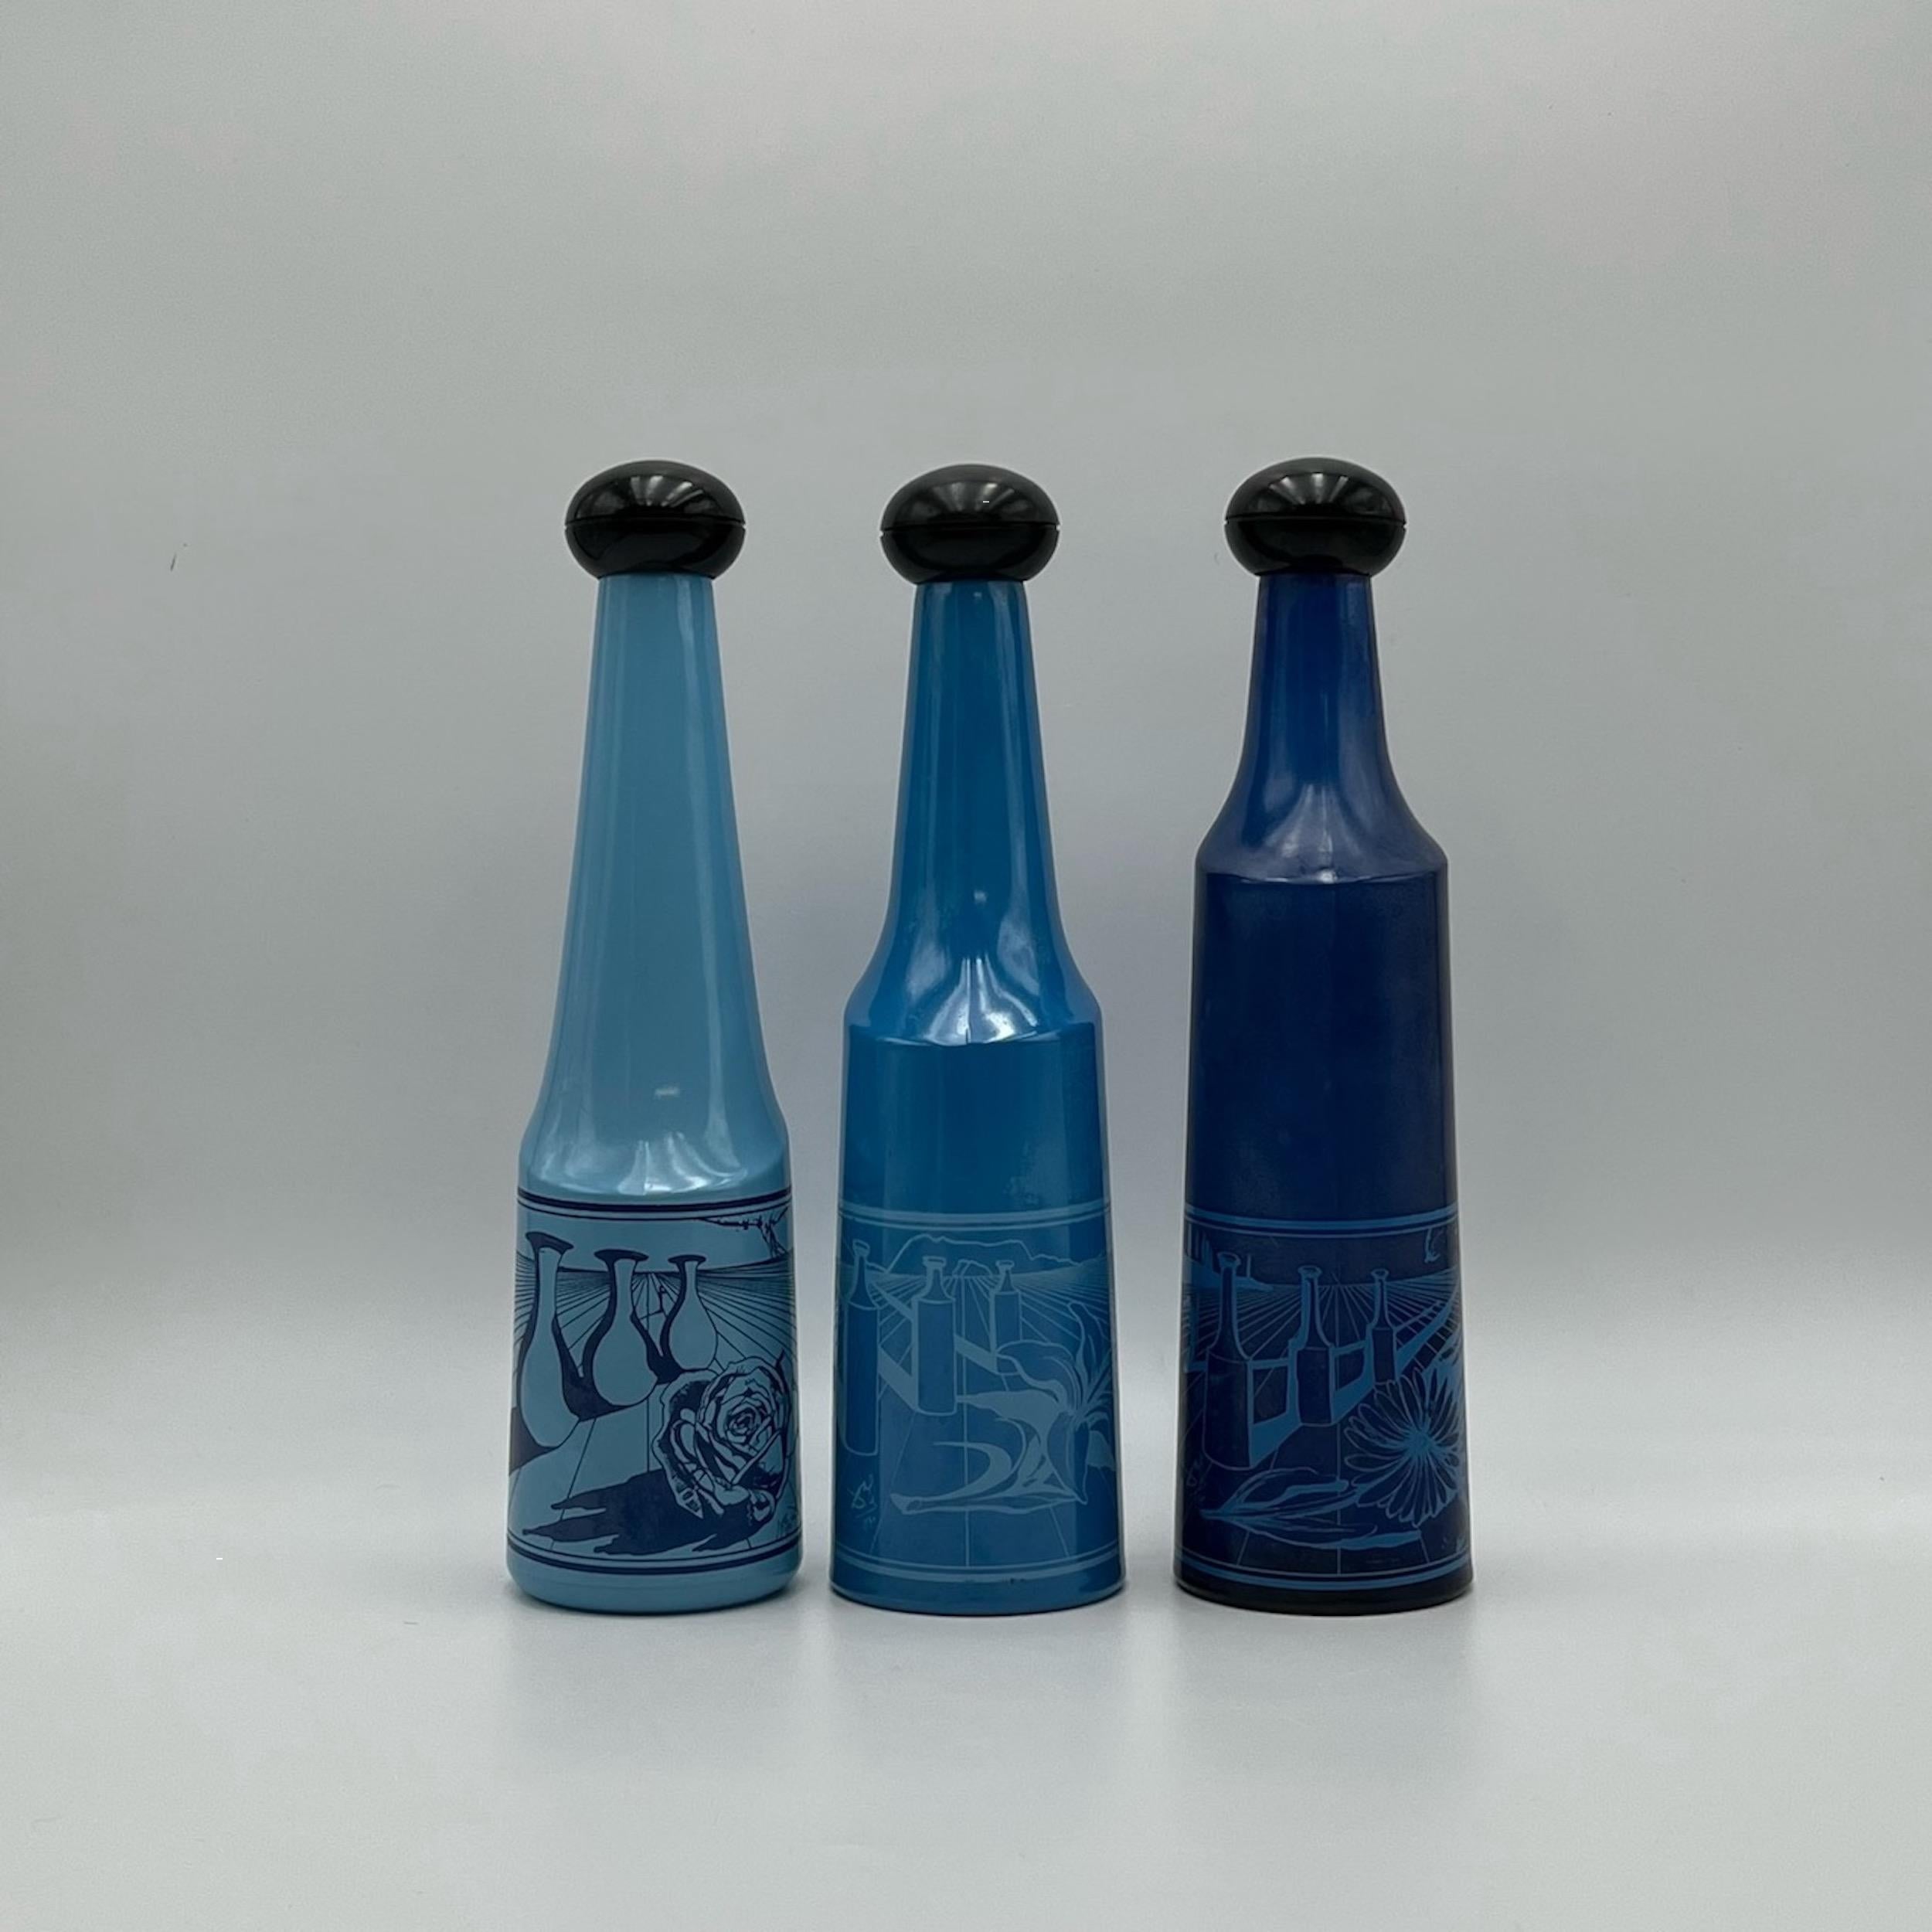 Collectible set of the iconic Vermouth bottles designed by Salvator Dalì for Rosso Antico.

These set of bottles – defined “avant-garde design objects” – is a limited edition, as in 1972 the production was stopped – and molds disrupted – in order to